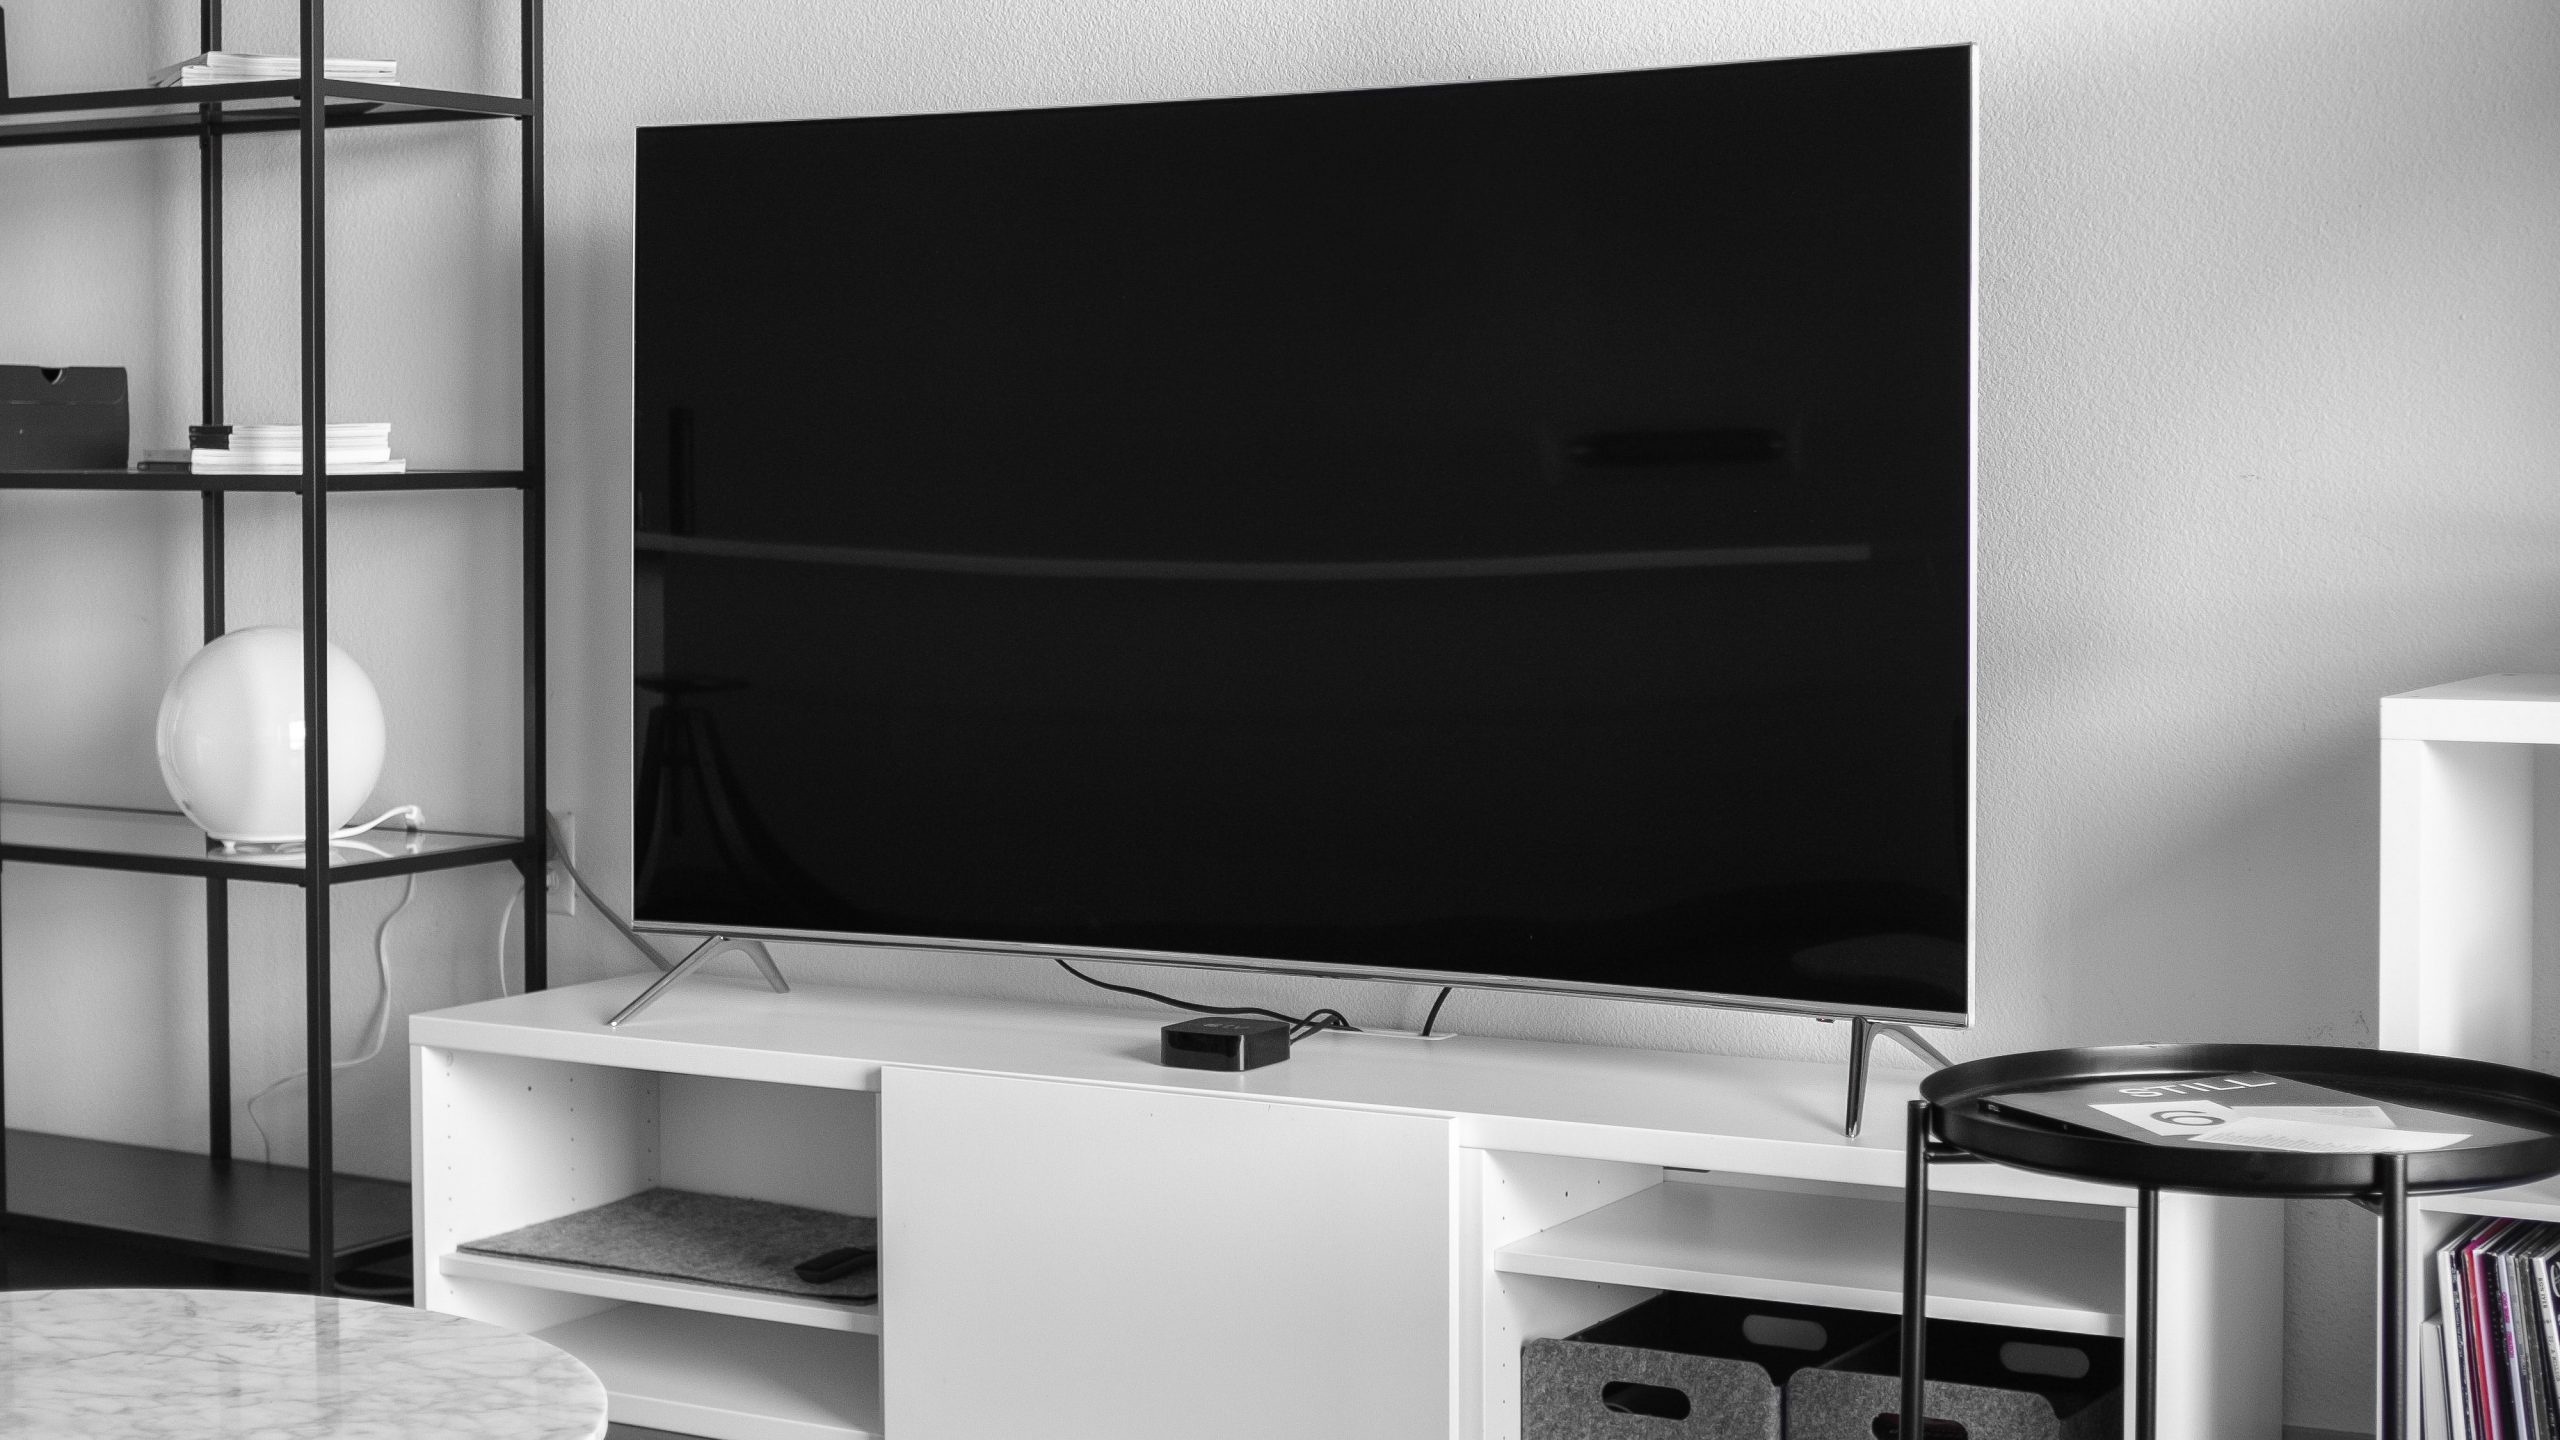 How to clean the screen of your TV - Products for cleaning the home